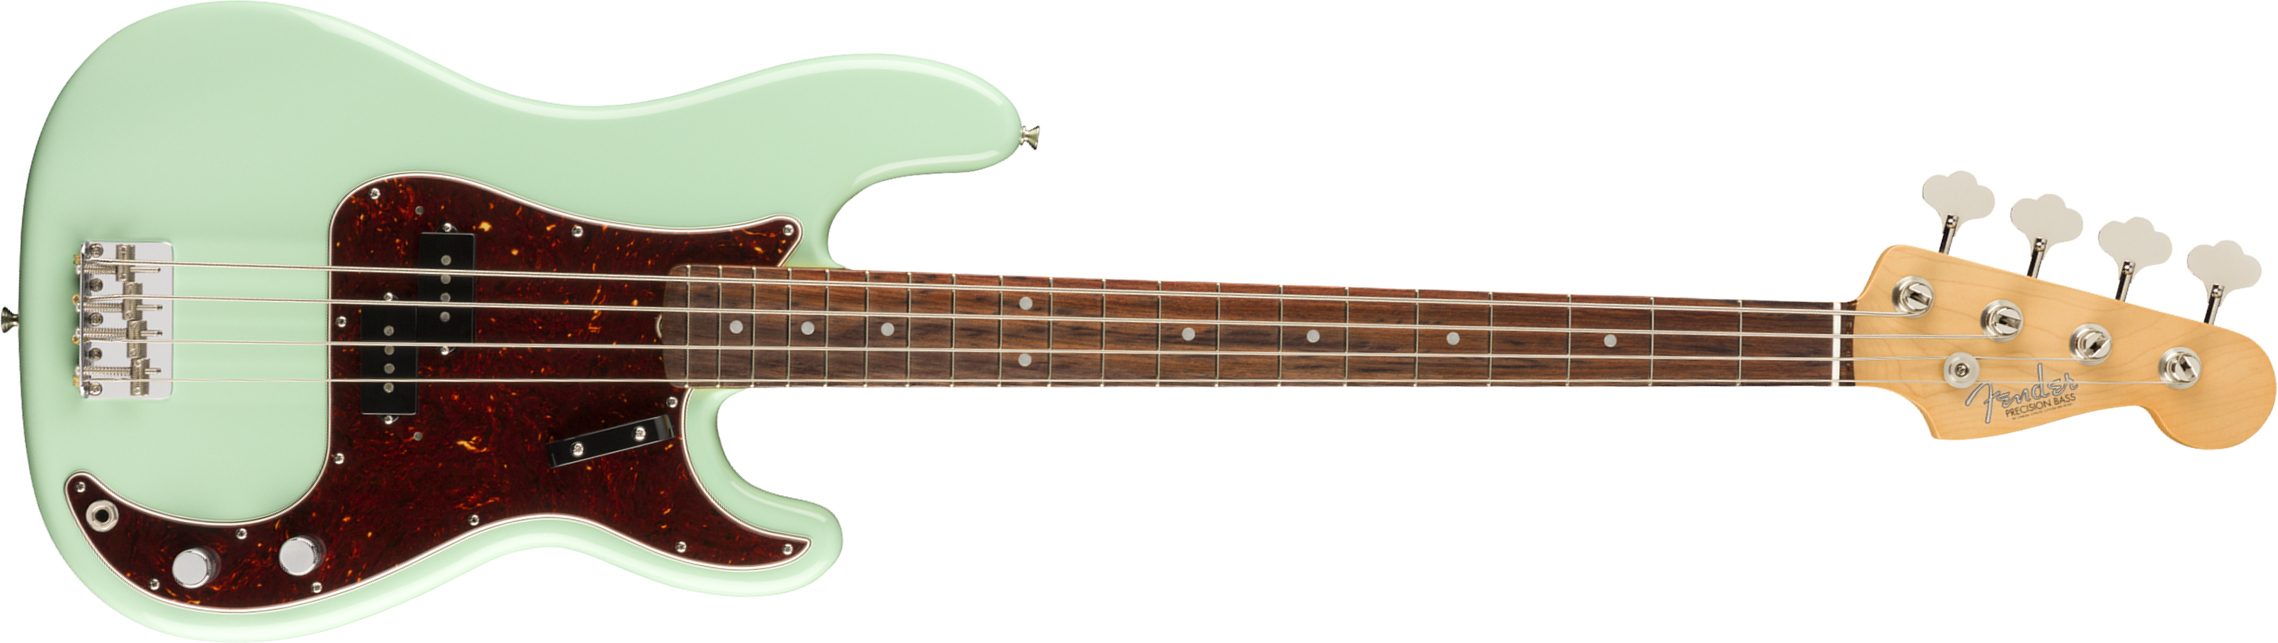 Fender Precision Bass '60s American Original Usa Rw - Surf Green - Solid body electric bass - Main picture